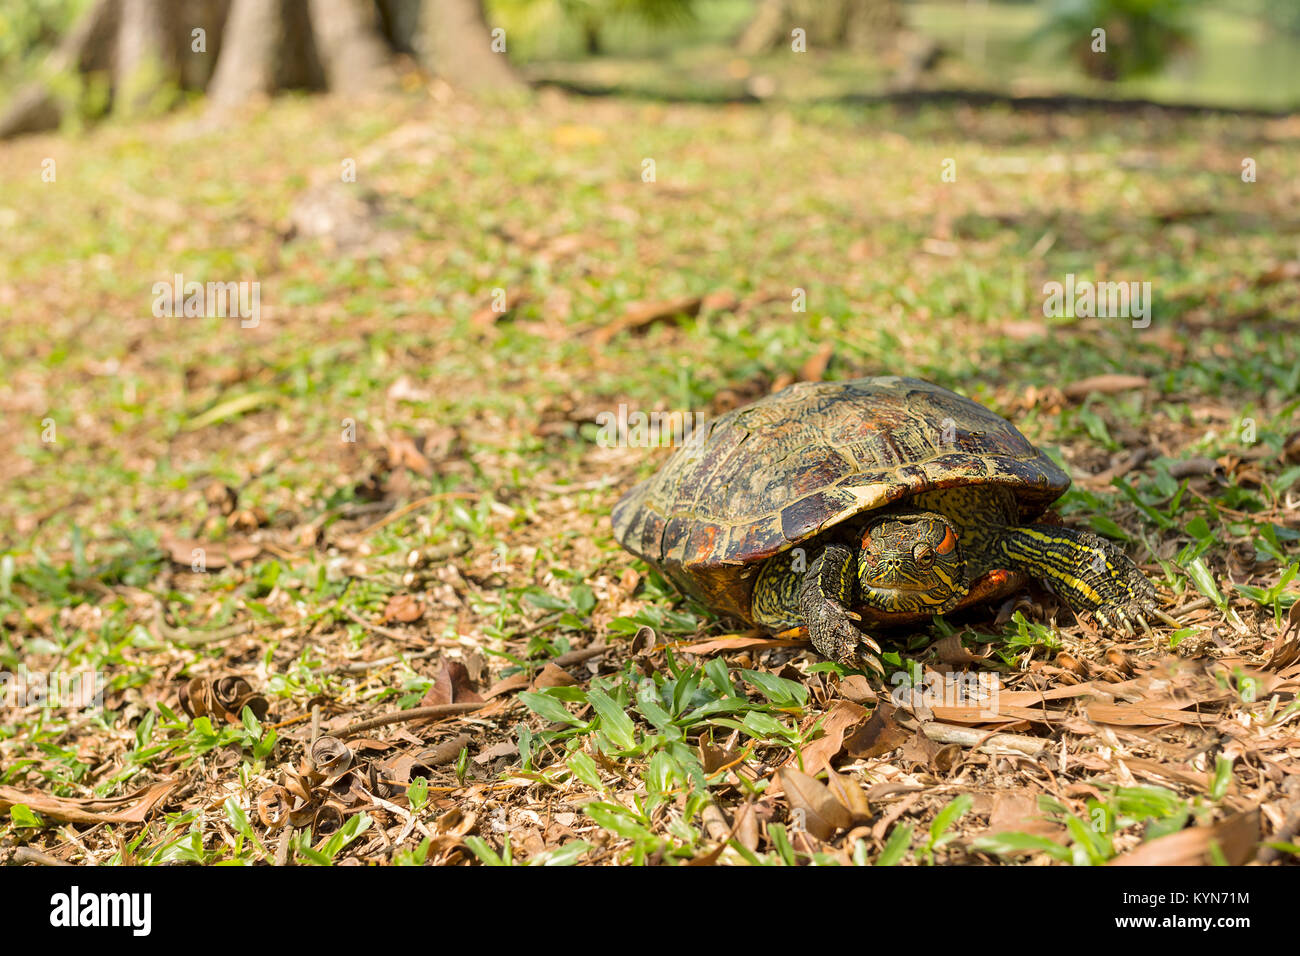 Red eared slider turtle doing a face palm on grassy bank. Stock Photo